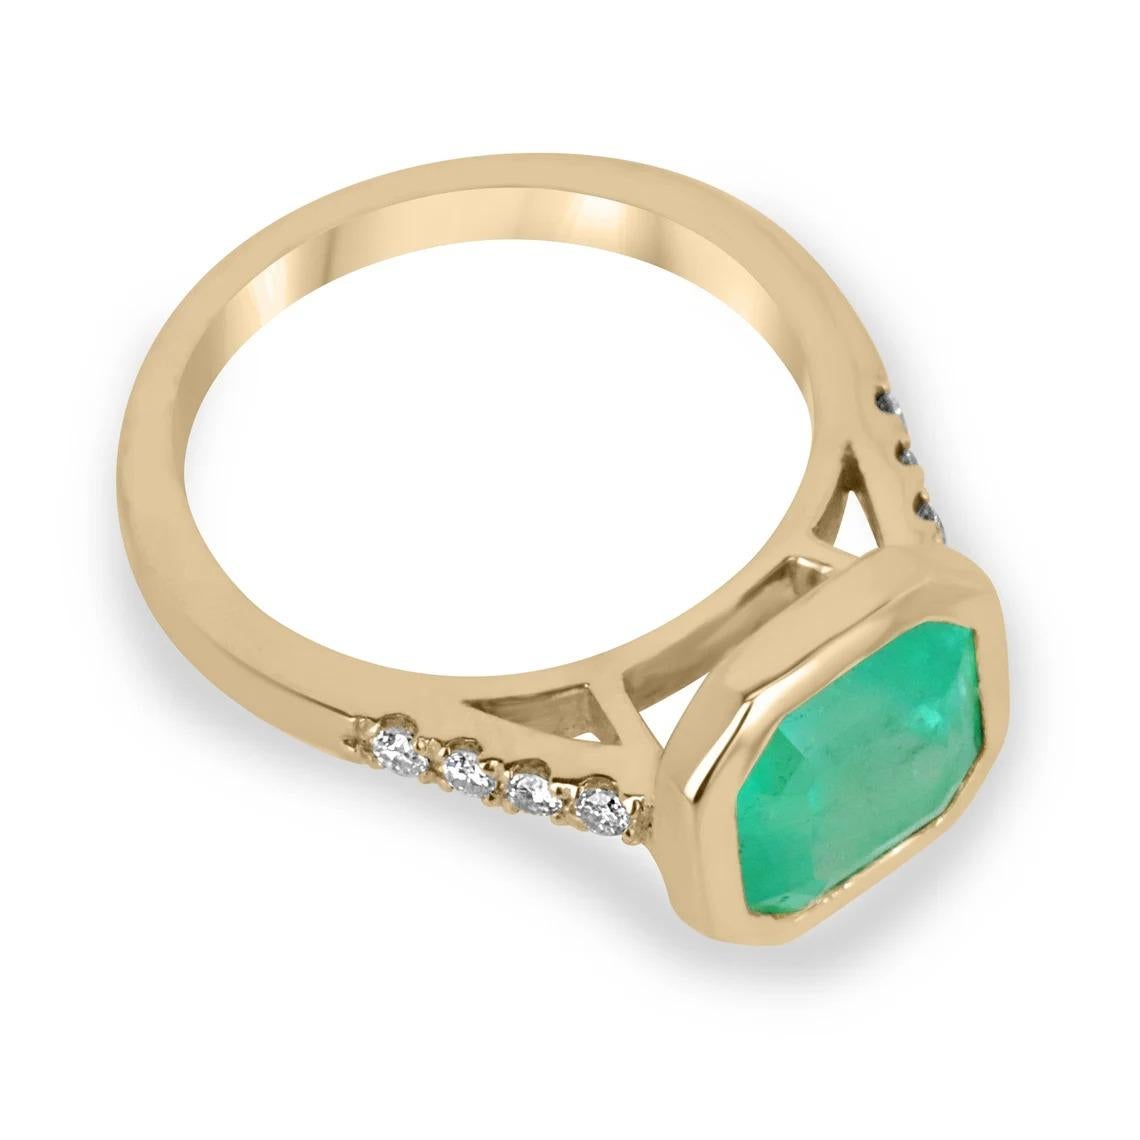 A remarkable Colombian emerald and diamond solitaire with accents engagement or right-hand ring. The center stone showcases a natural emerald with vibrant green color and good clarity. Minor natural internal inclusions are common in all earth-mined